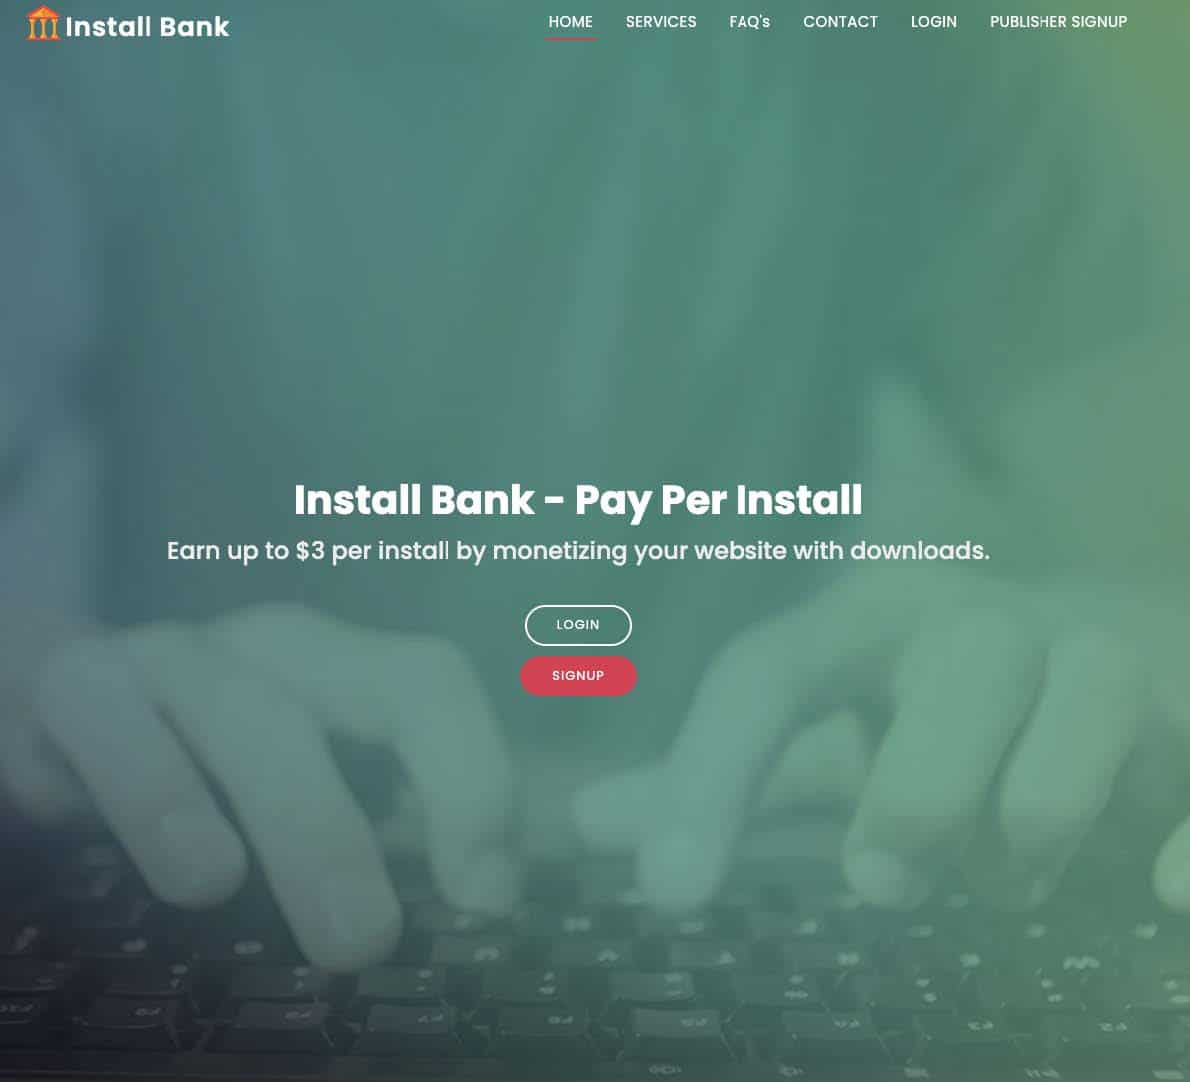 The InstallBank homepage